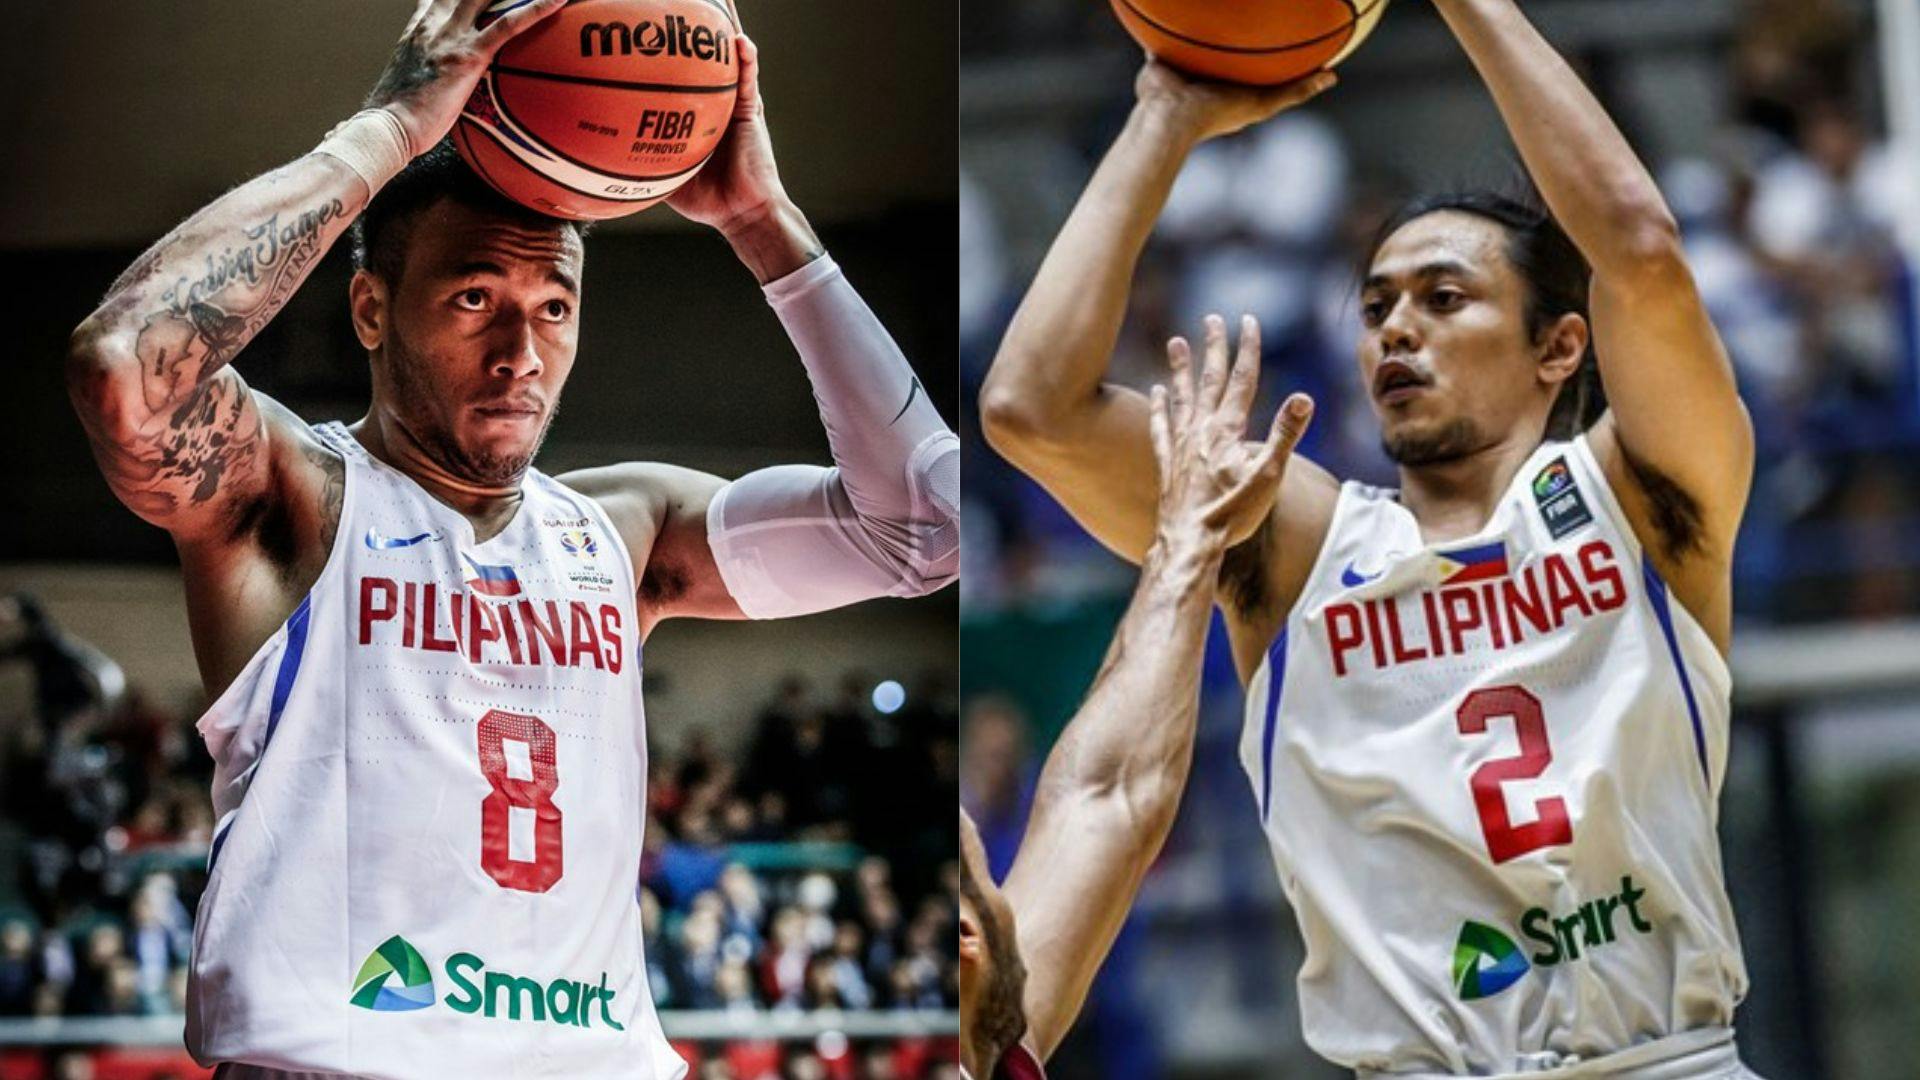 POC chief Bambol Tolentino issues strong statement as China continues to deny appeals for Calvin Abueva, Terrence Romeo, other athletes